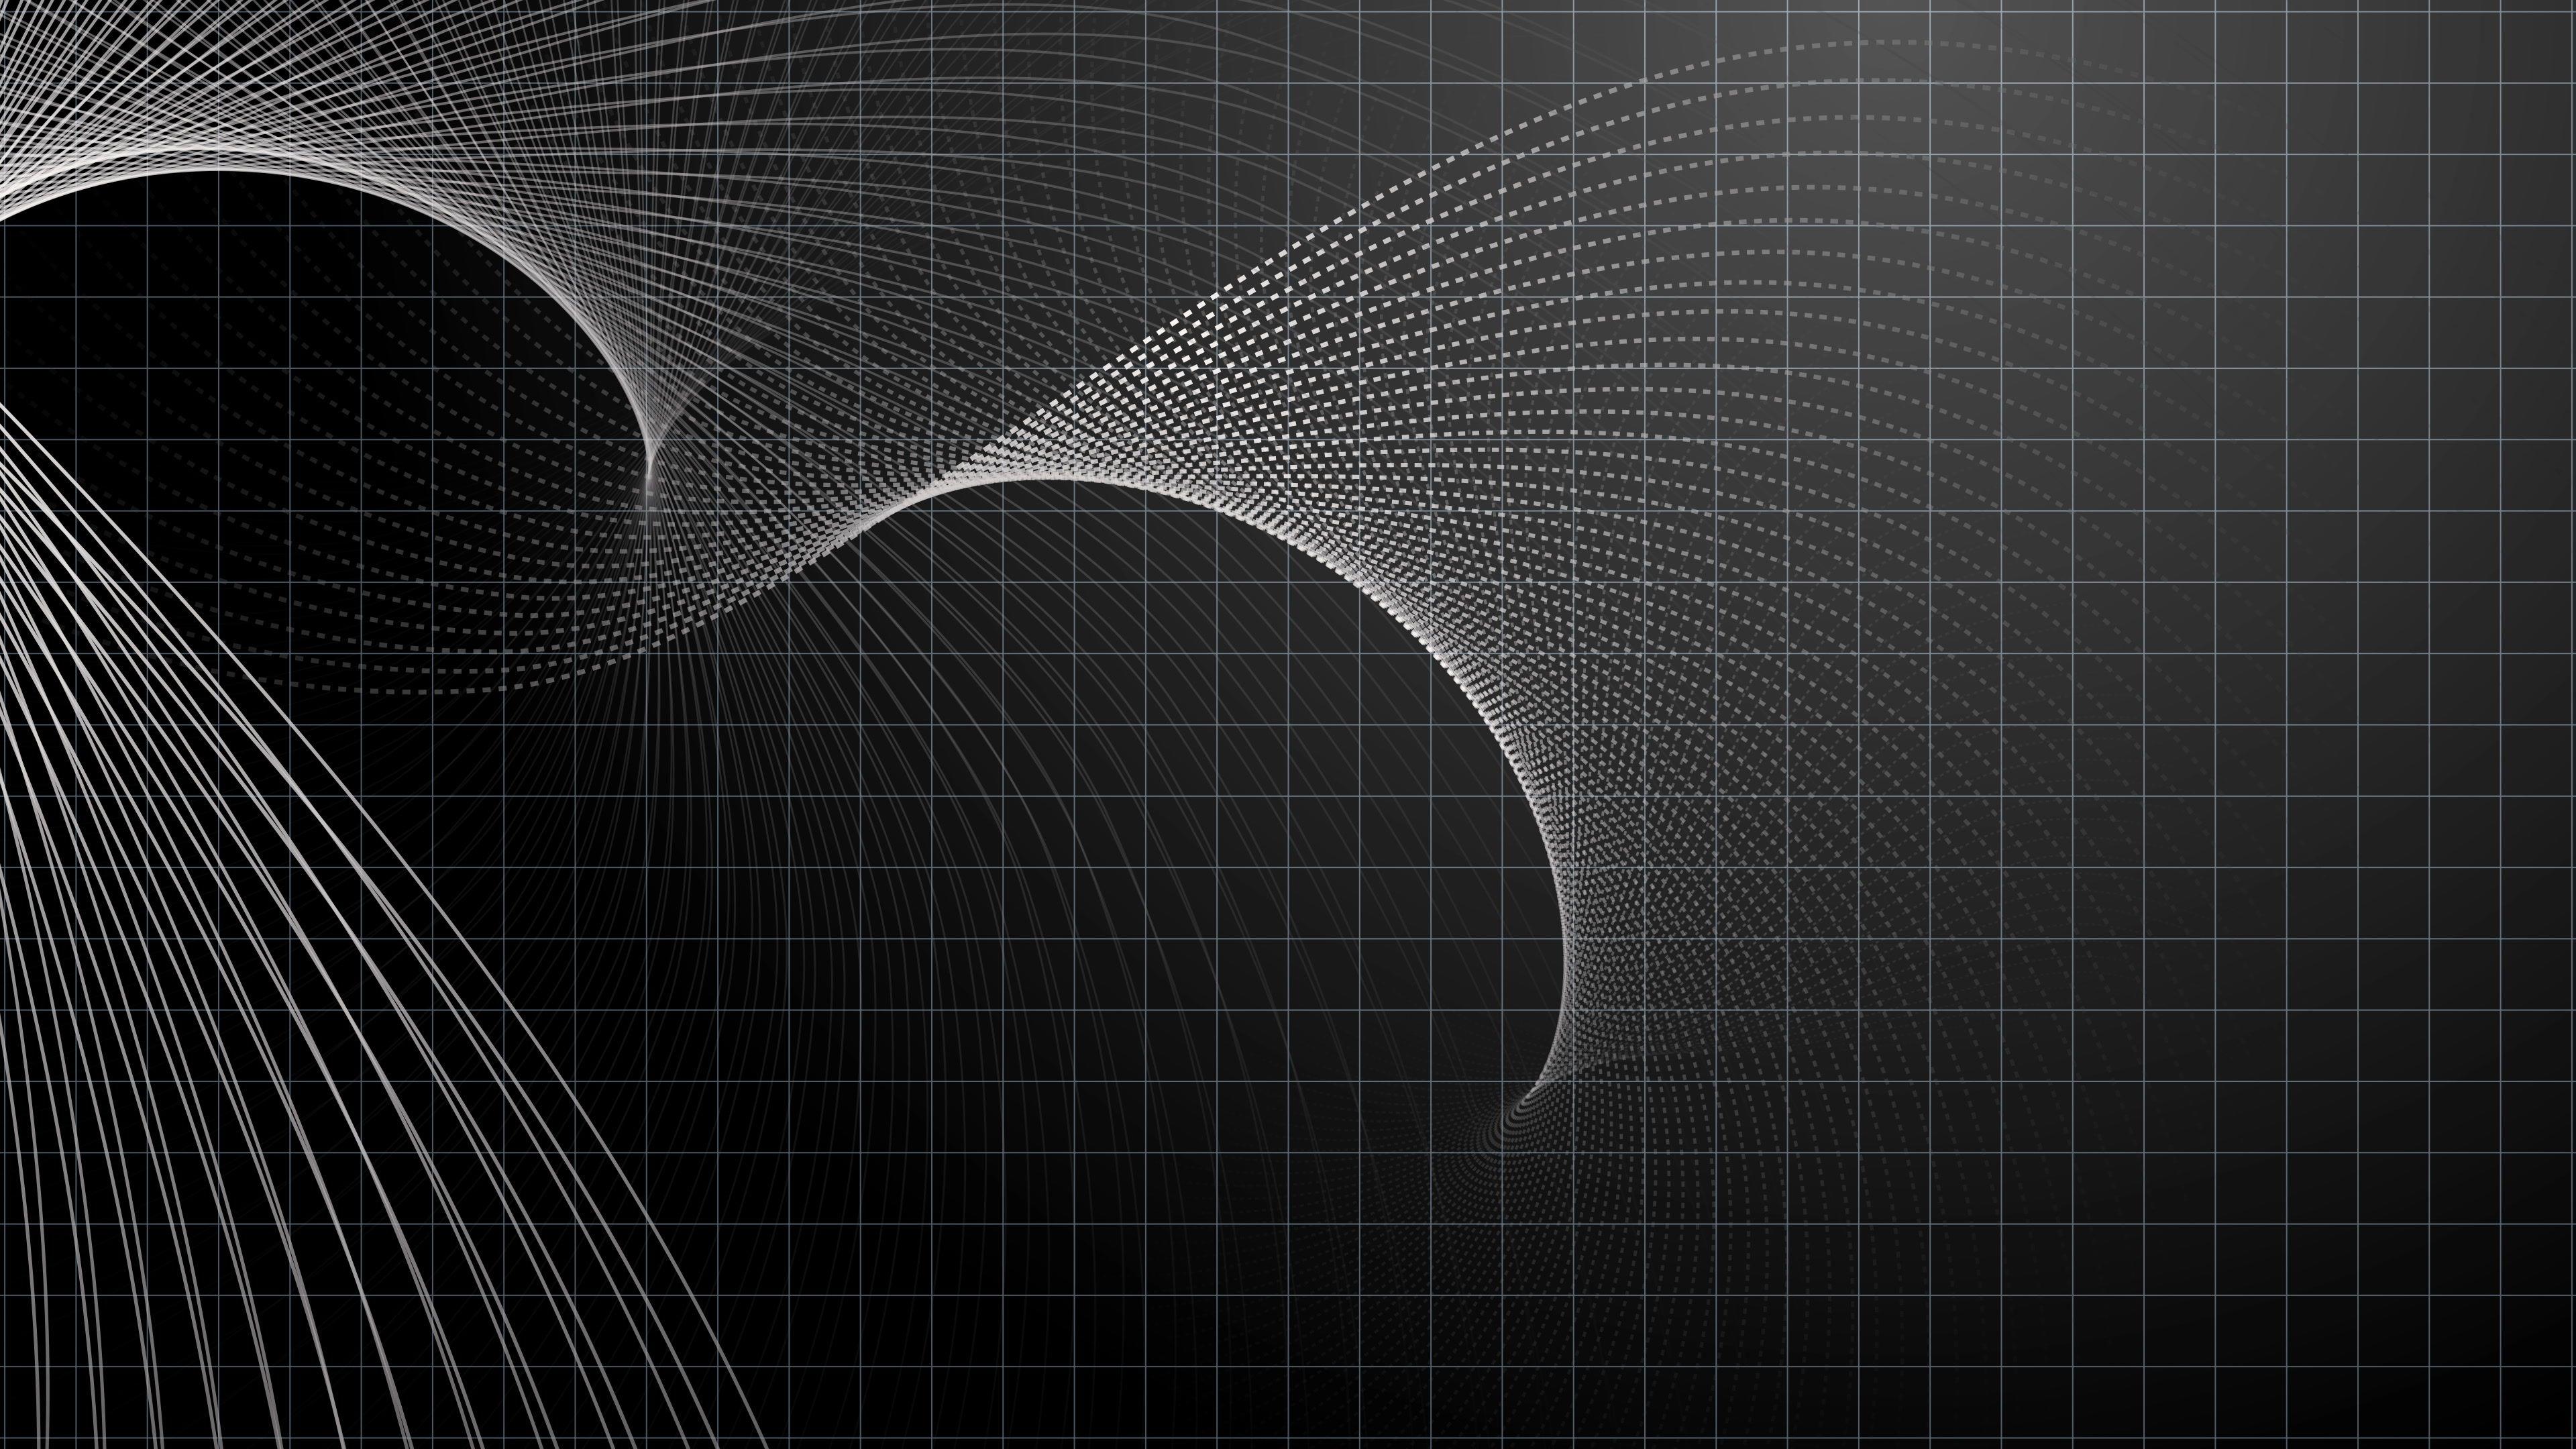 Video: Abstract geometric dark gray background with moving curves